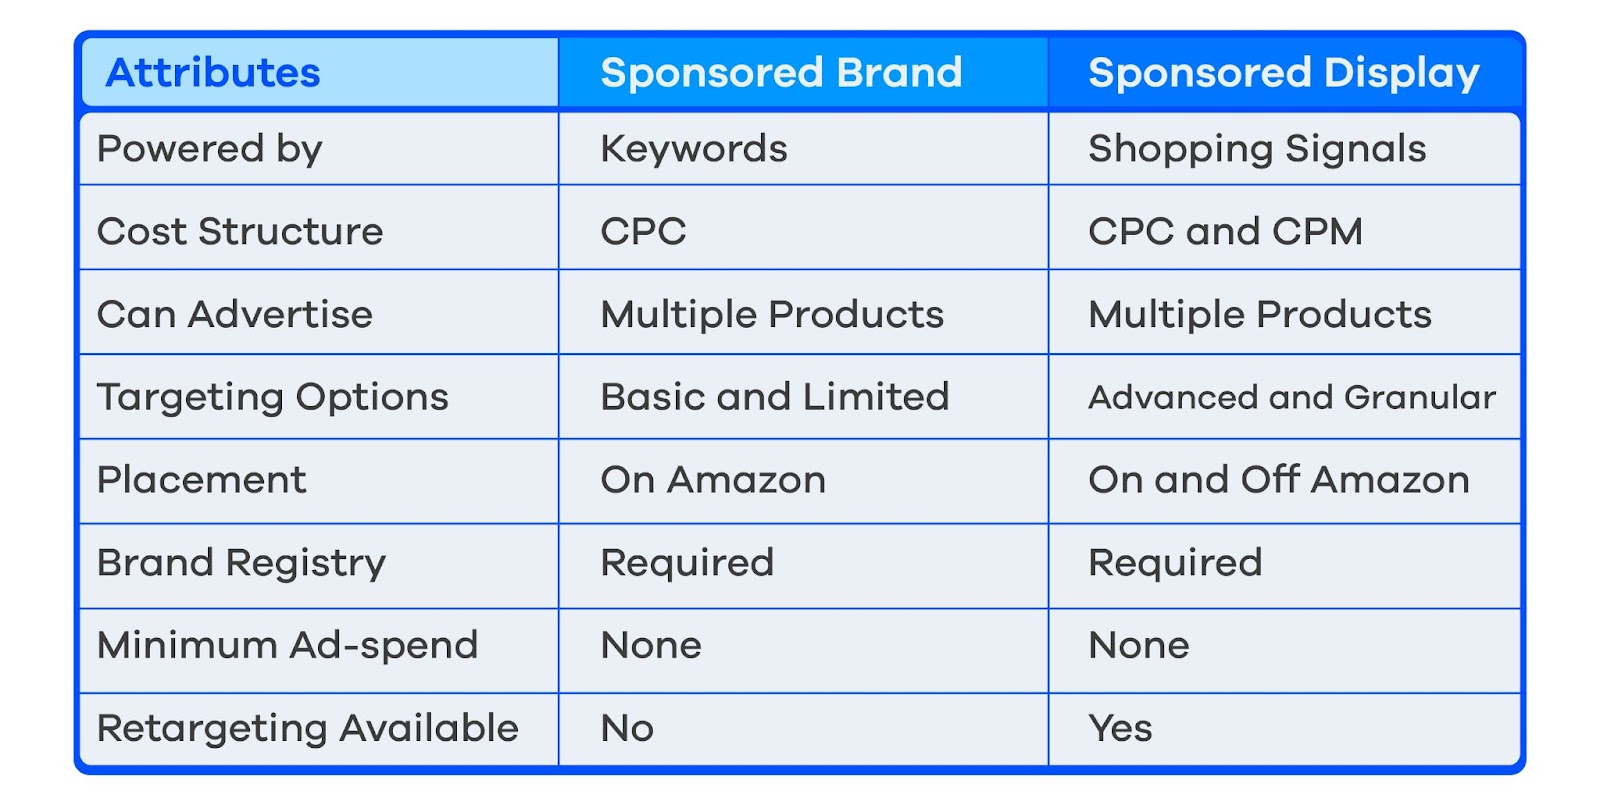 Here Is A Side By Side Comparison Image Of Sponsored Brands And Sponsored Display Ads